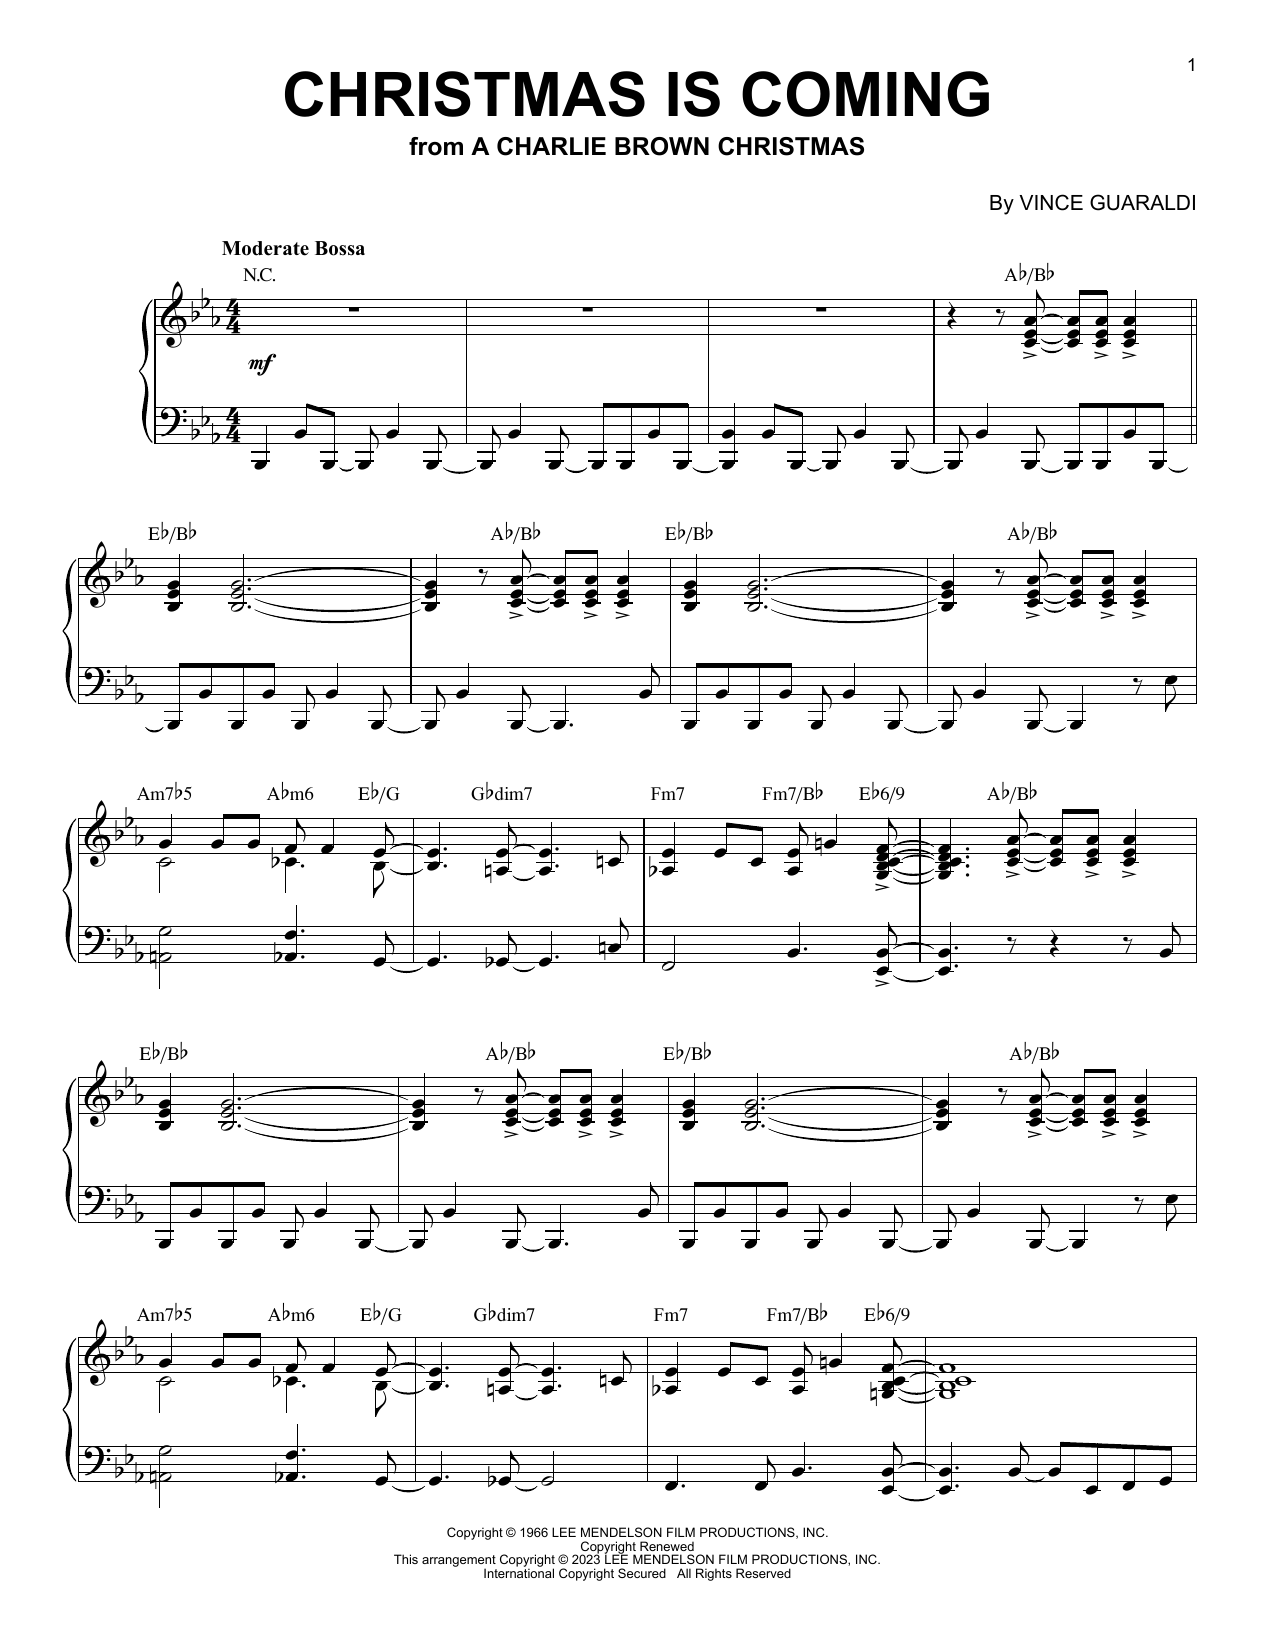 Download Vince Guaraldi Christmas Is Coming [Jazz version] (arr Sheet Music